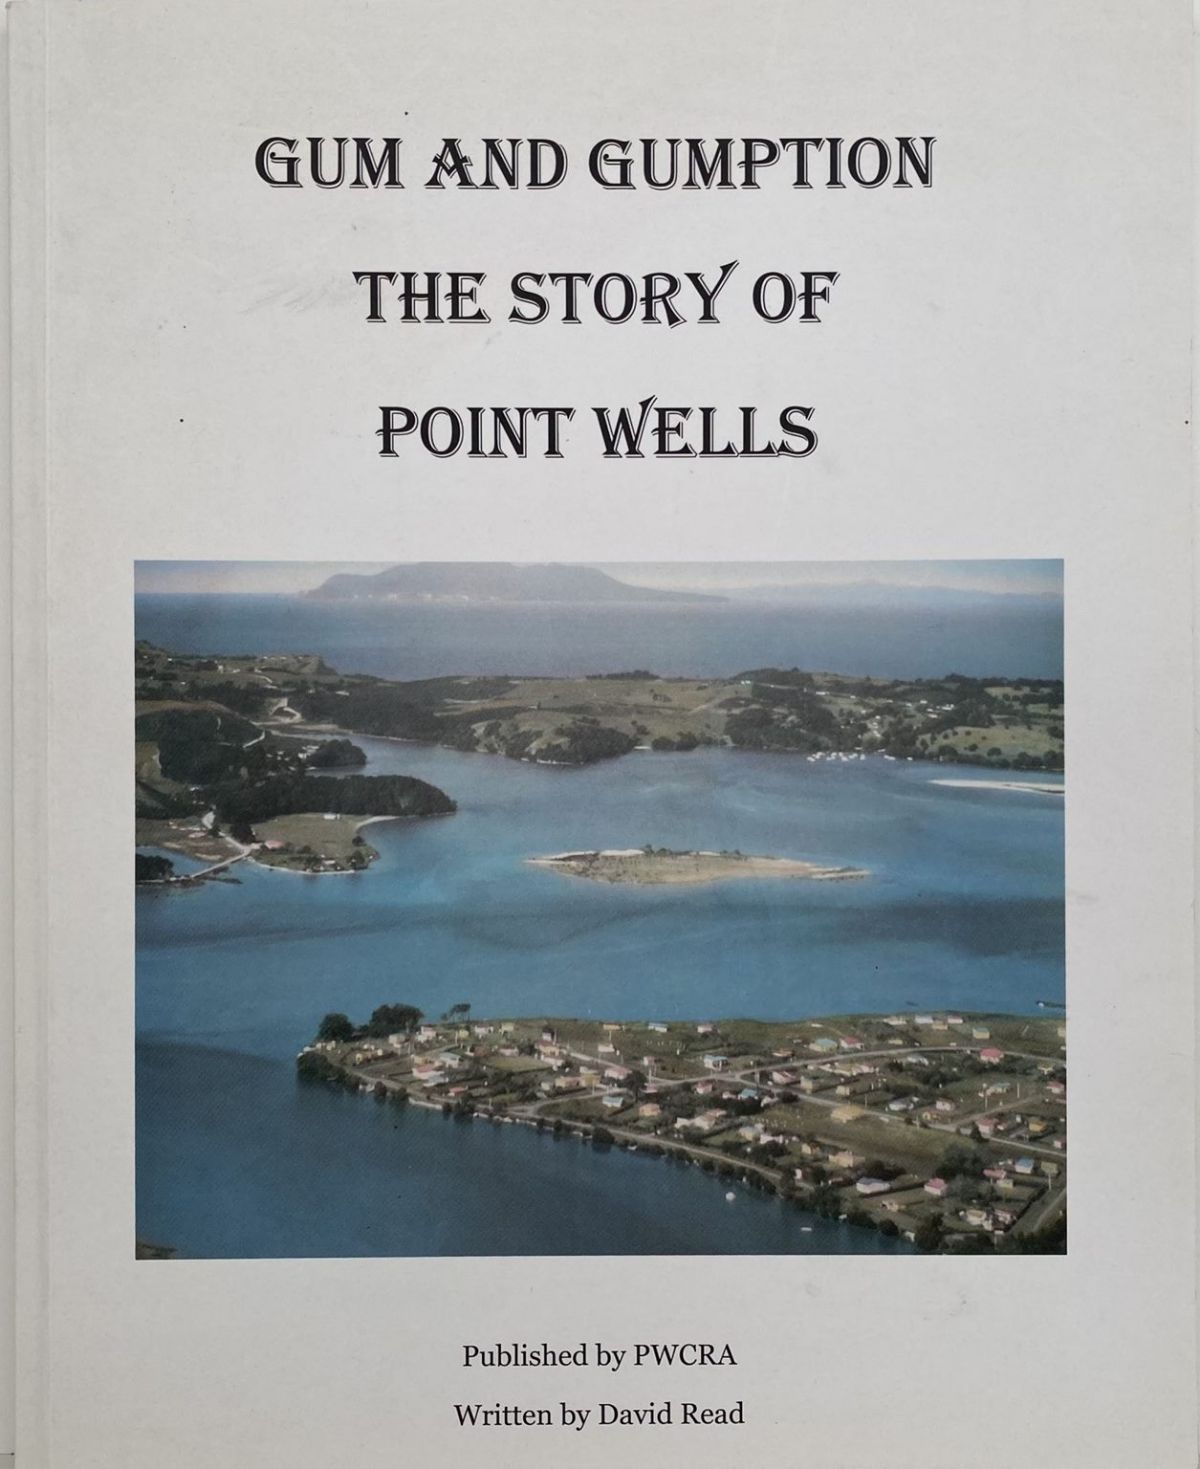 GUM AND GUMPTION: The Story of Point Wells